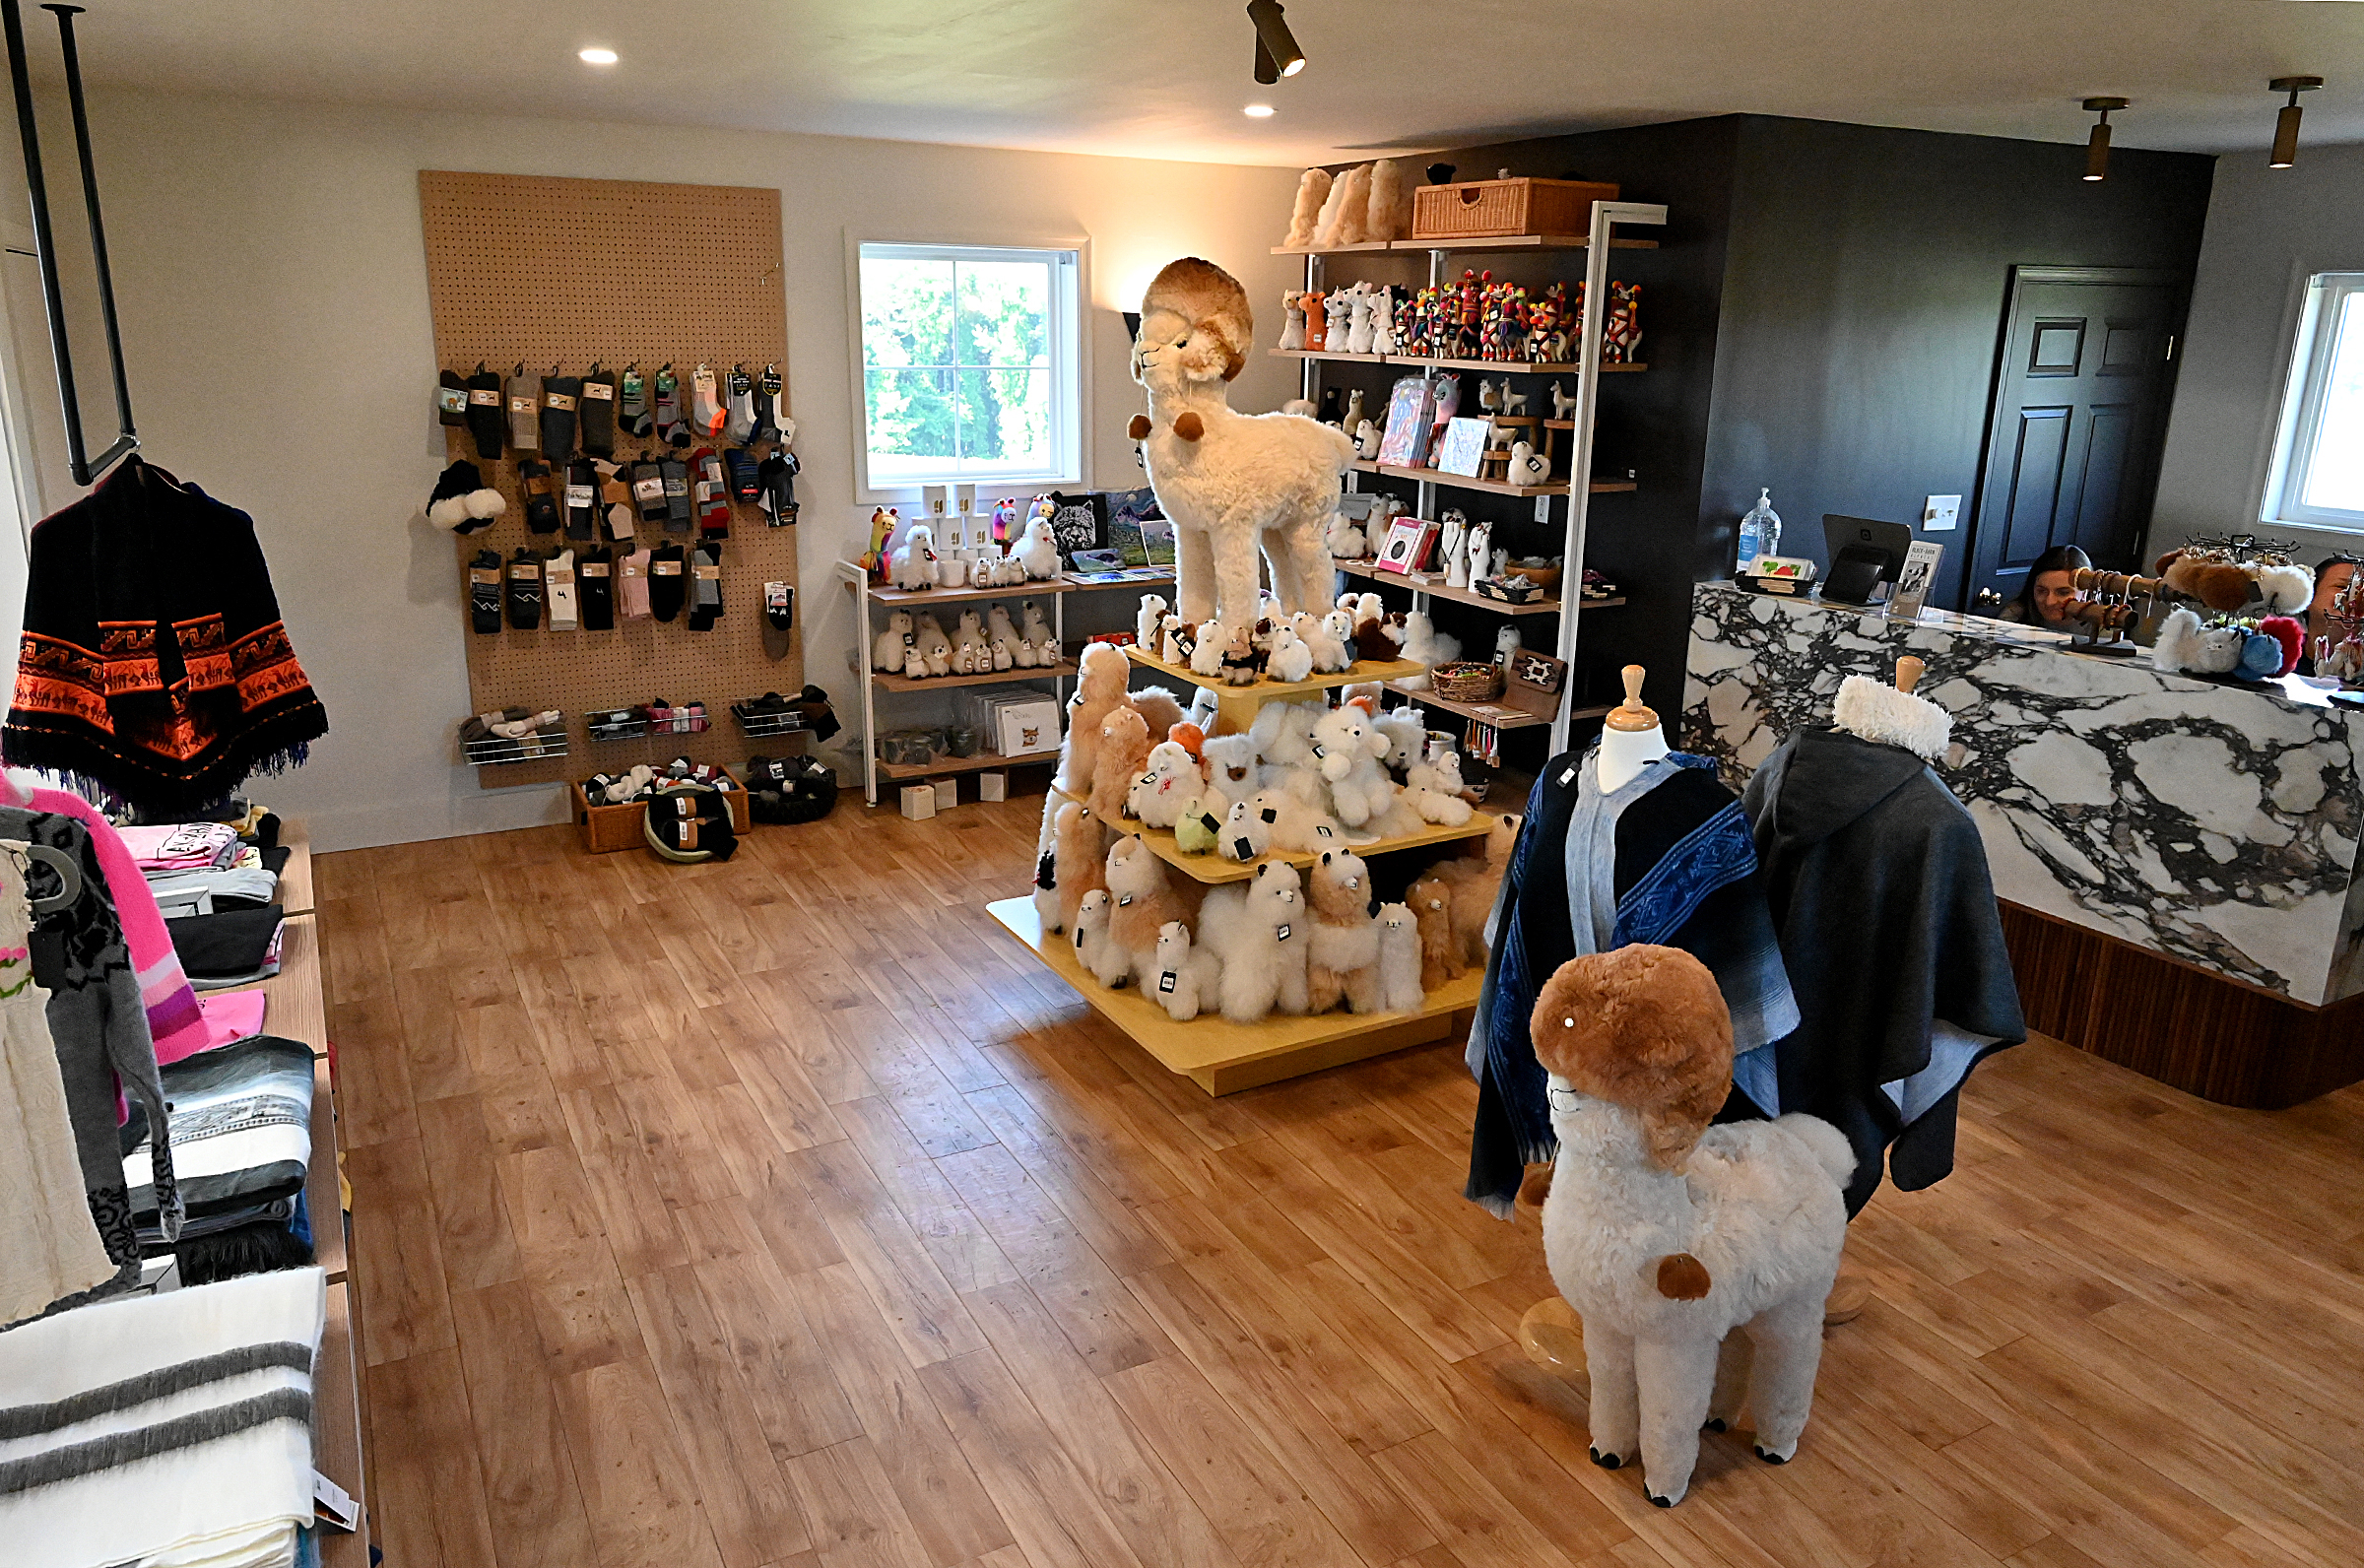 The Black Barn Alpacas gift shop offers several items for sale, some made in Peru and Ecuador, from alpaca yarn to items made with alpaca fleece such as socks, ponchos, throws, slippers, toys, etc. Black Barn Alpacas in Finksburg is owned and operated by Travis and Yussy McManus. (Jeffrey F. Bill/Staff photo)